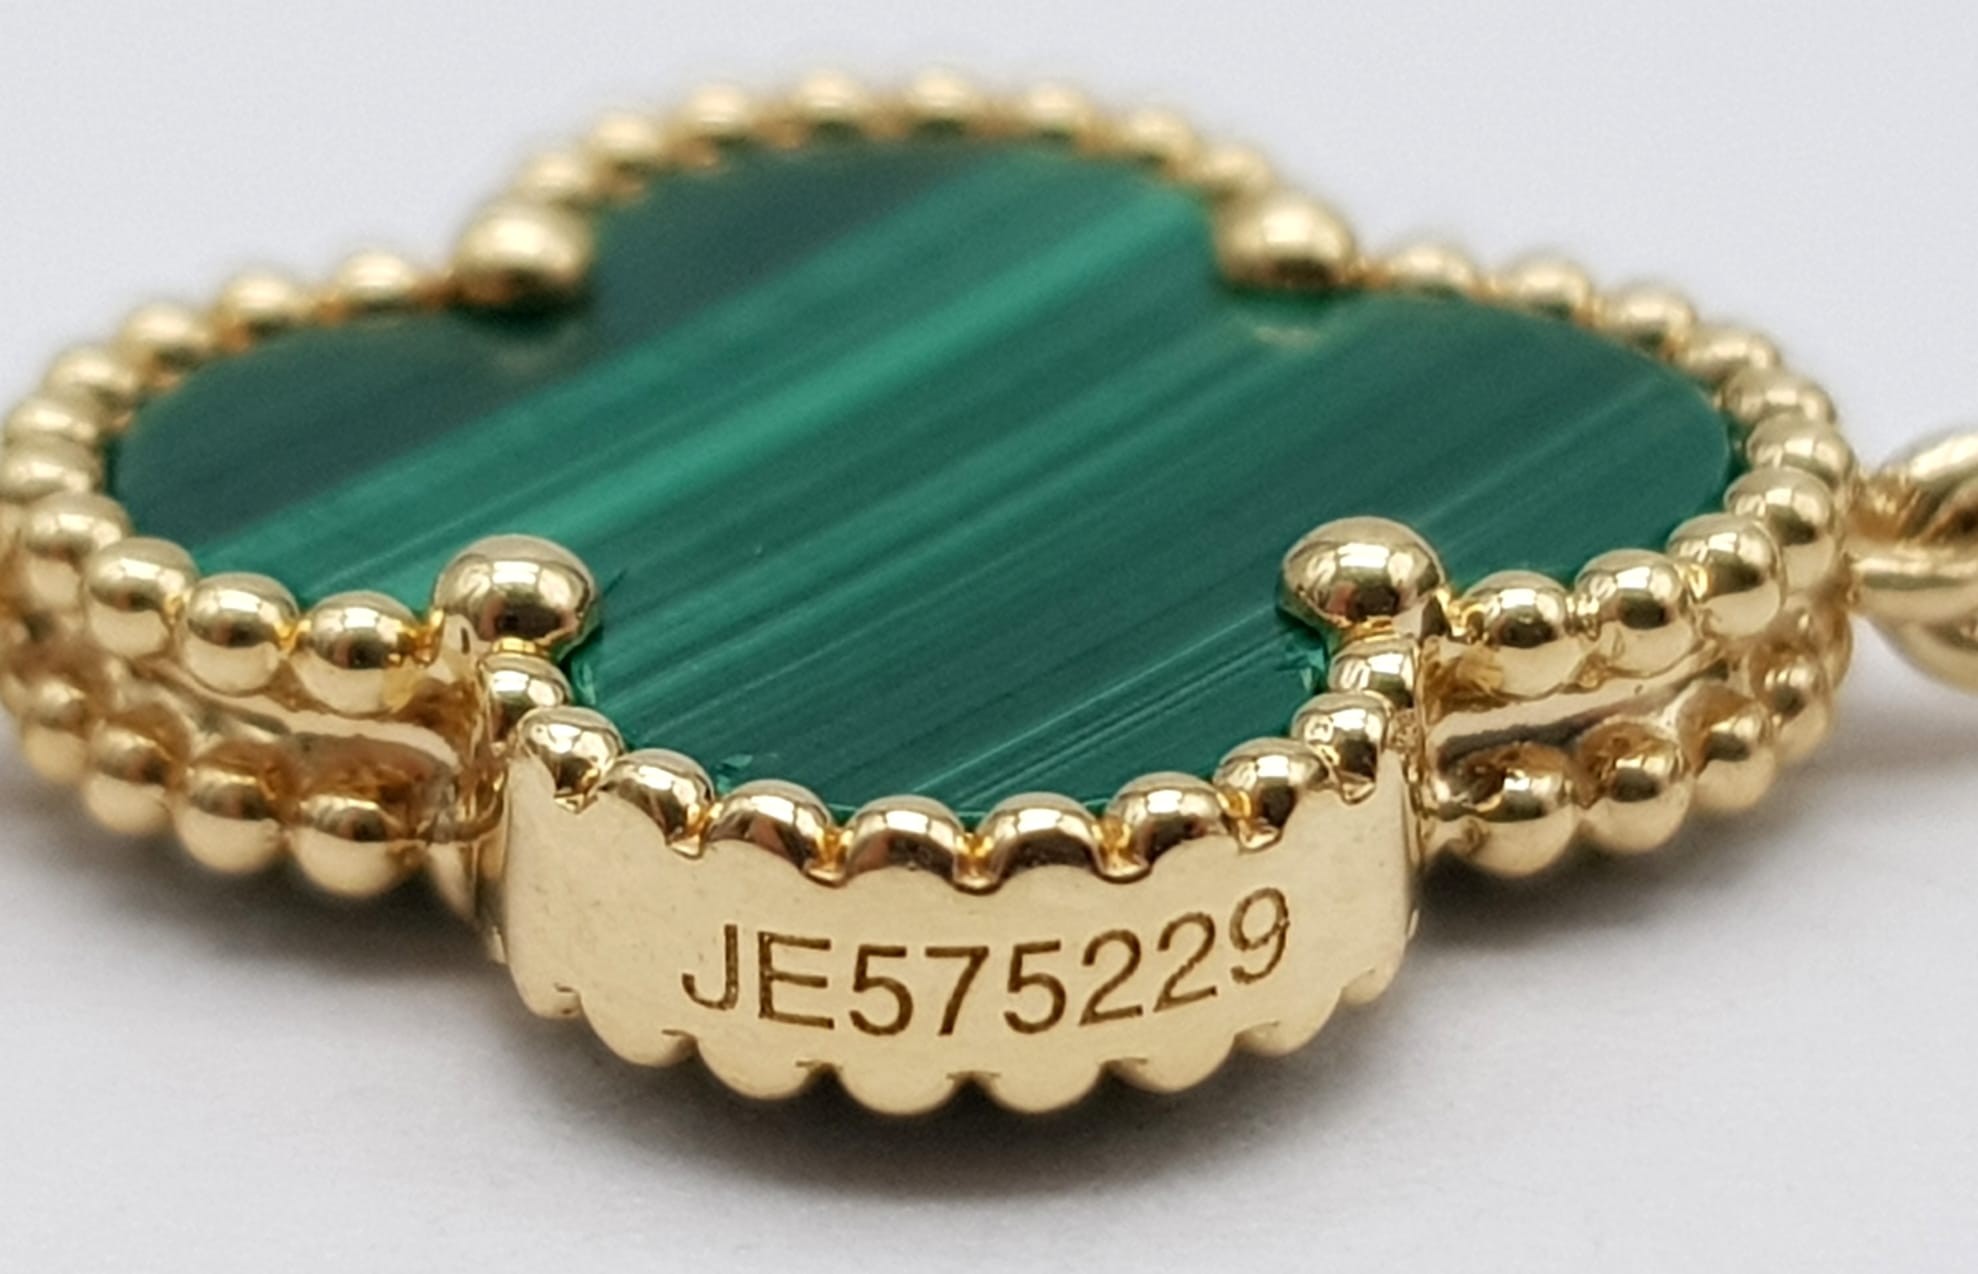 A Van Cleef and Arpels Alhambra bracelet with 5 motifs - 18ct yellow gold with malachite inserts. - Image 3 of 7